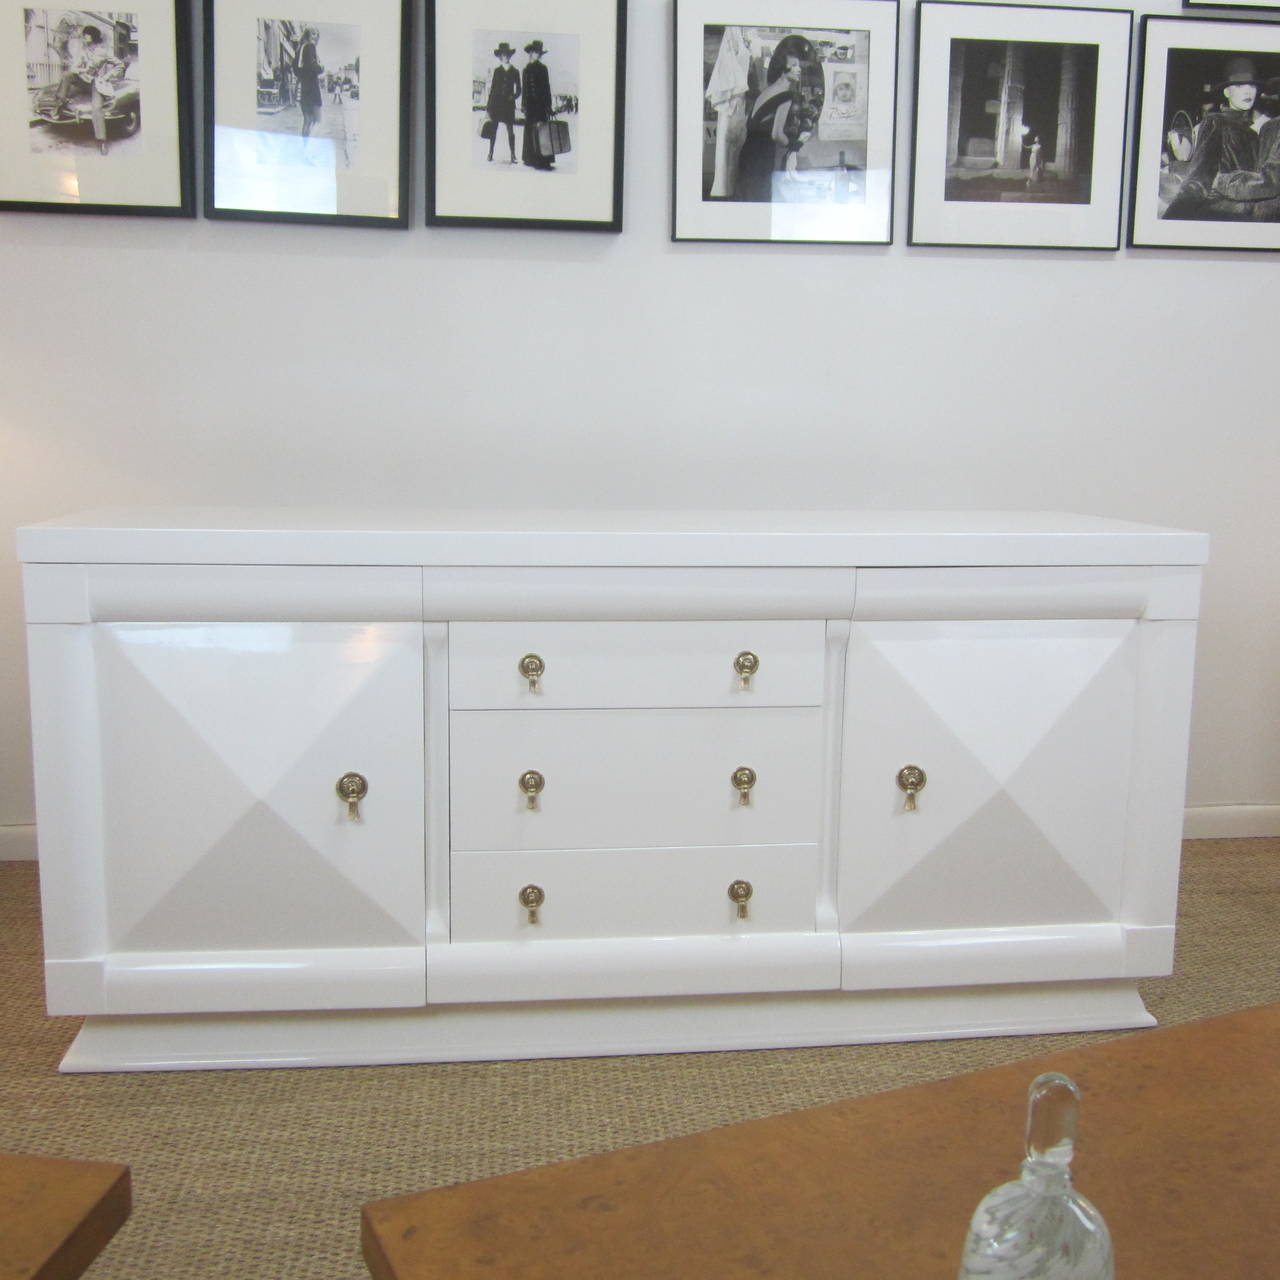 A beautifully finished 1950s credenza with raised diamond front doors flanking three center drawers, all with original recently polished brass hardware.  
Perfectly finished inside and out in durable high gloss white lacquer, this credenza has